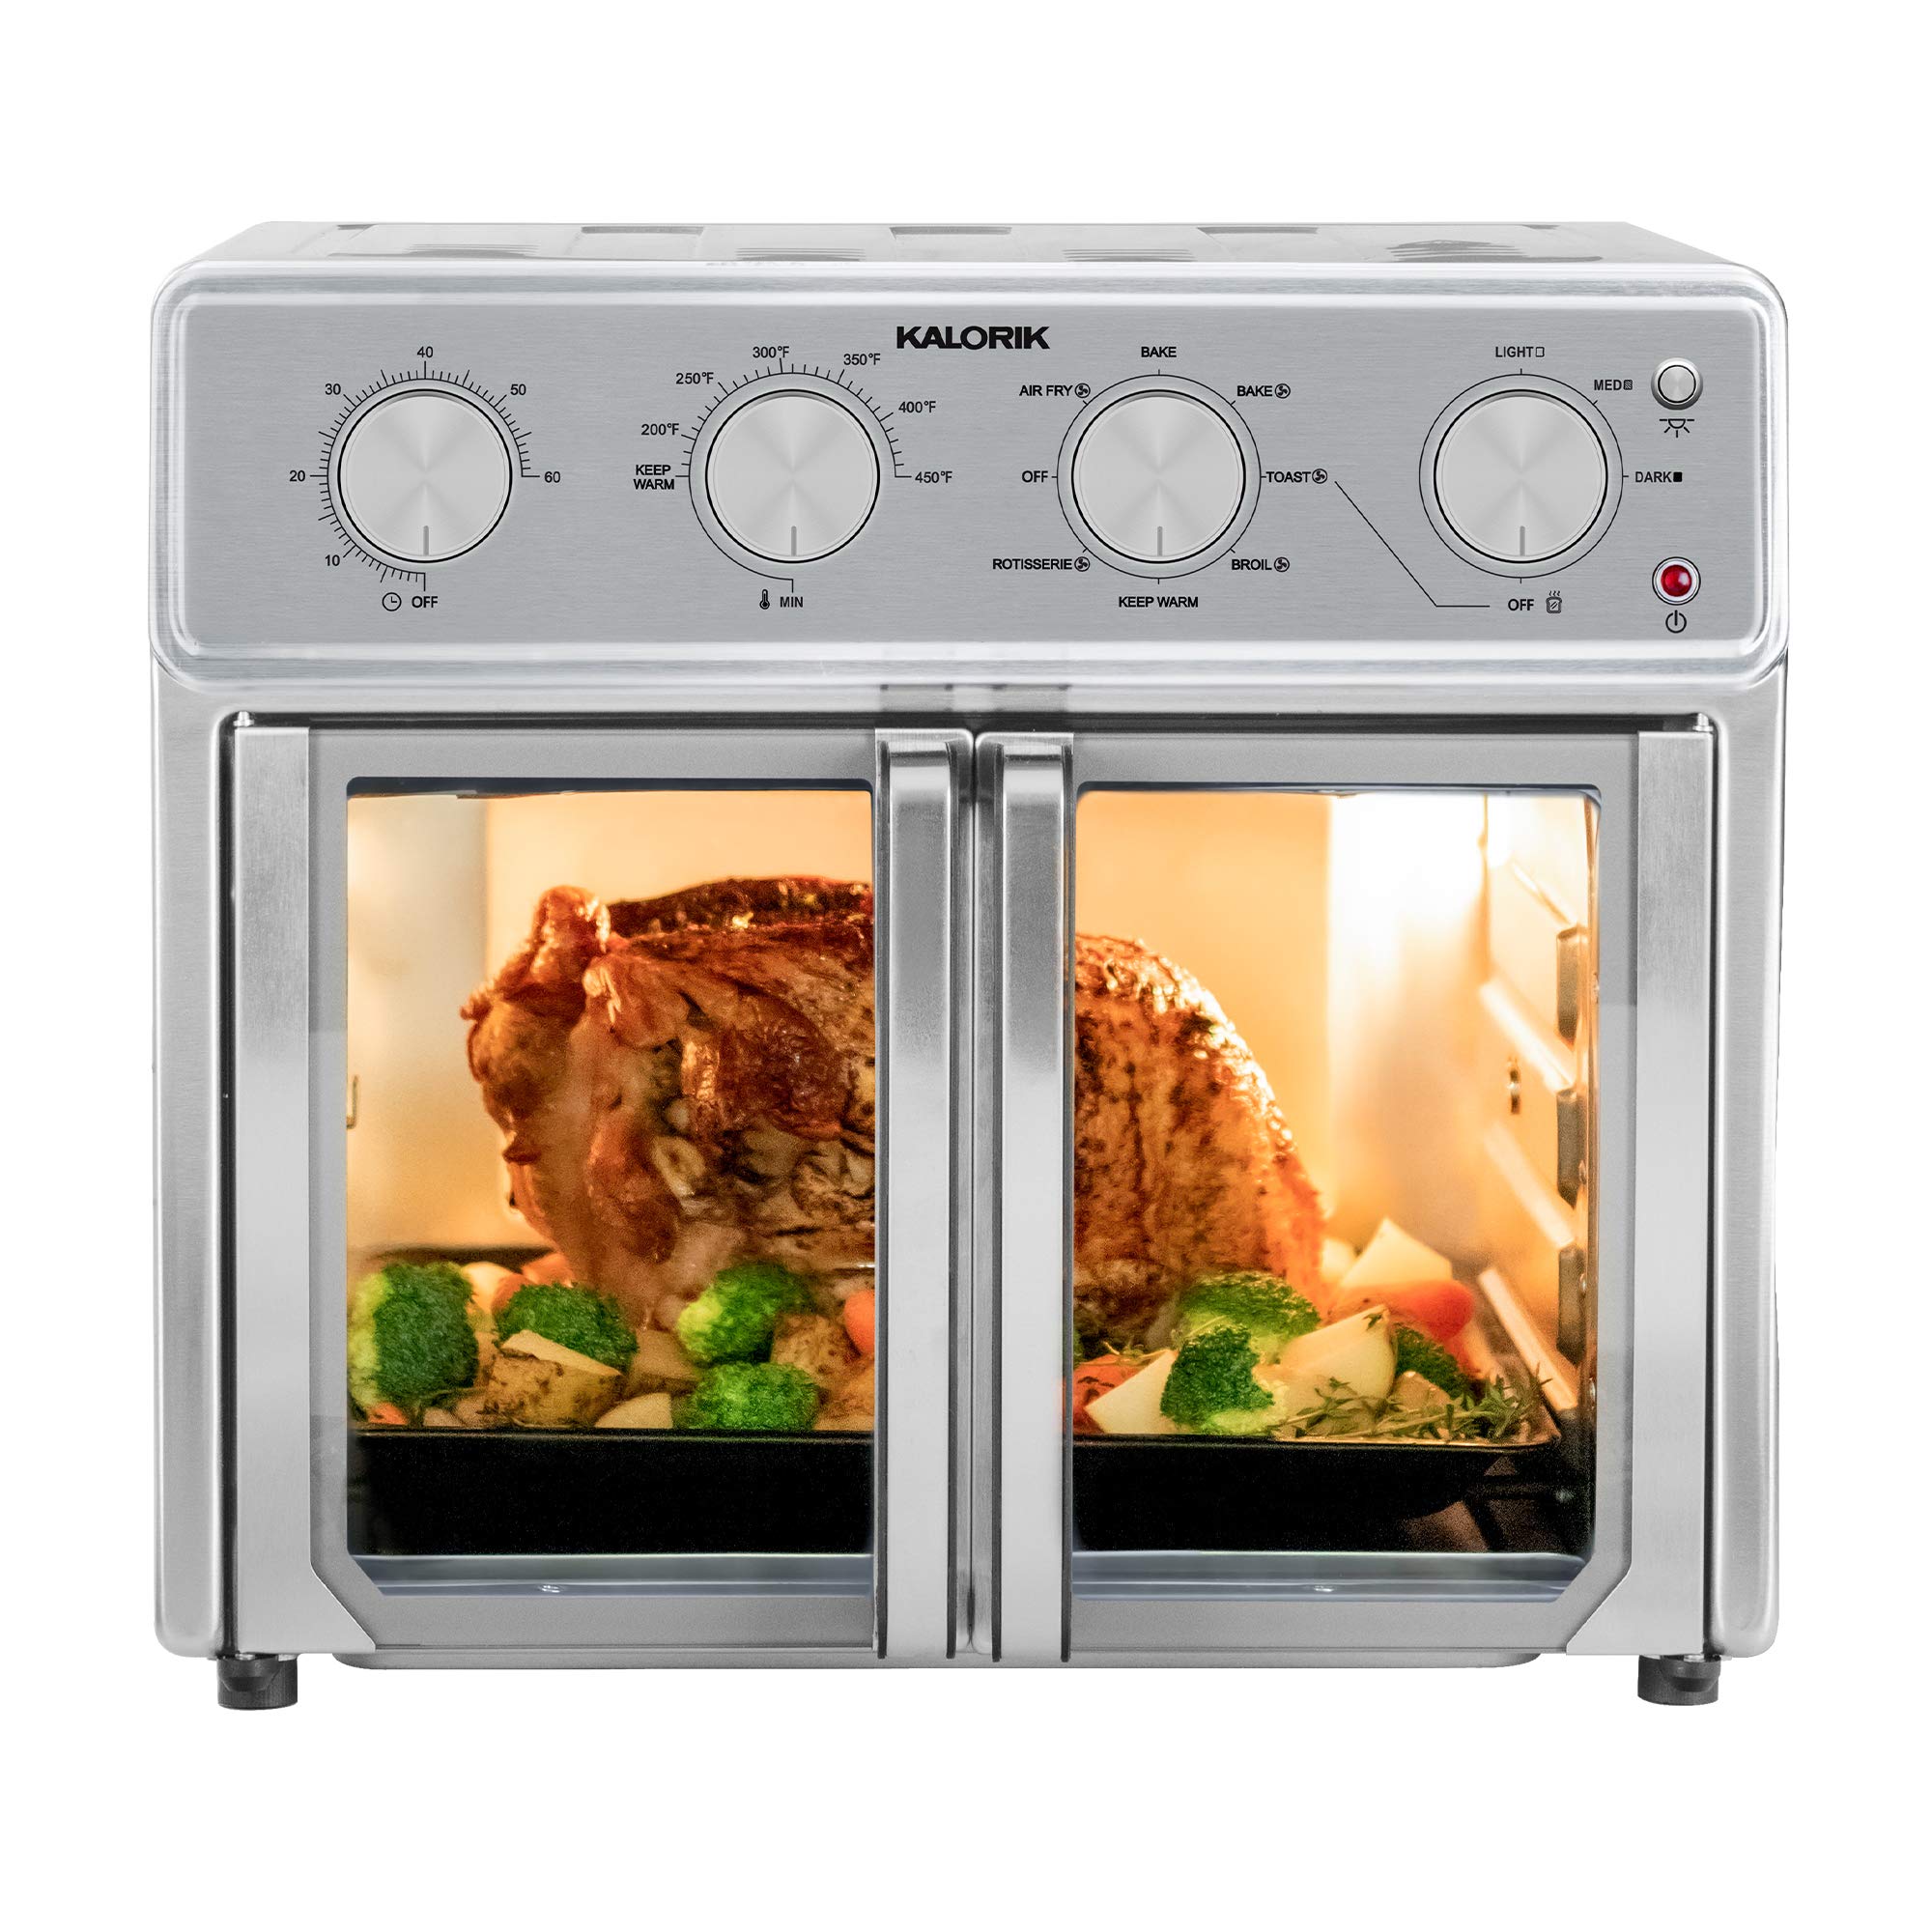 Kalorik MAXX® Air Fryer Oven, 26 Quart 9-in-1 Countertop Toaster Oven and Air Fryer Combo - Fry, Bake, Roast, Rotisserie, & More, 7 Easy-to-Clean Accessories, 1700W, Stainless Steel, AFO 47267 OW